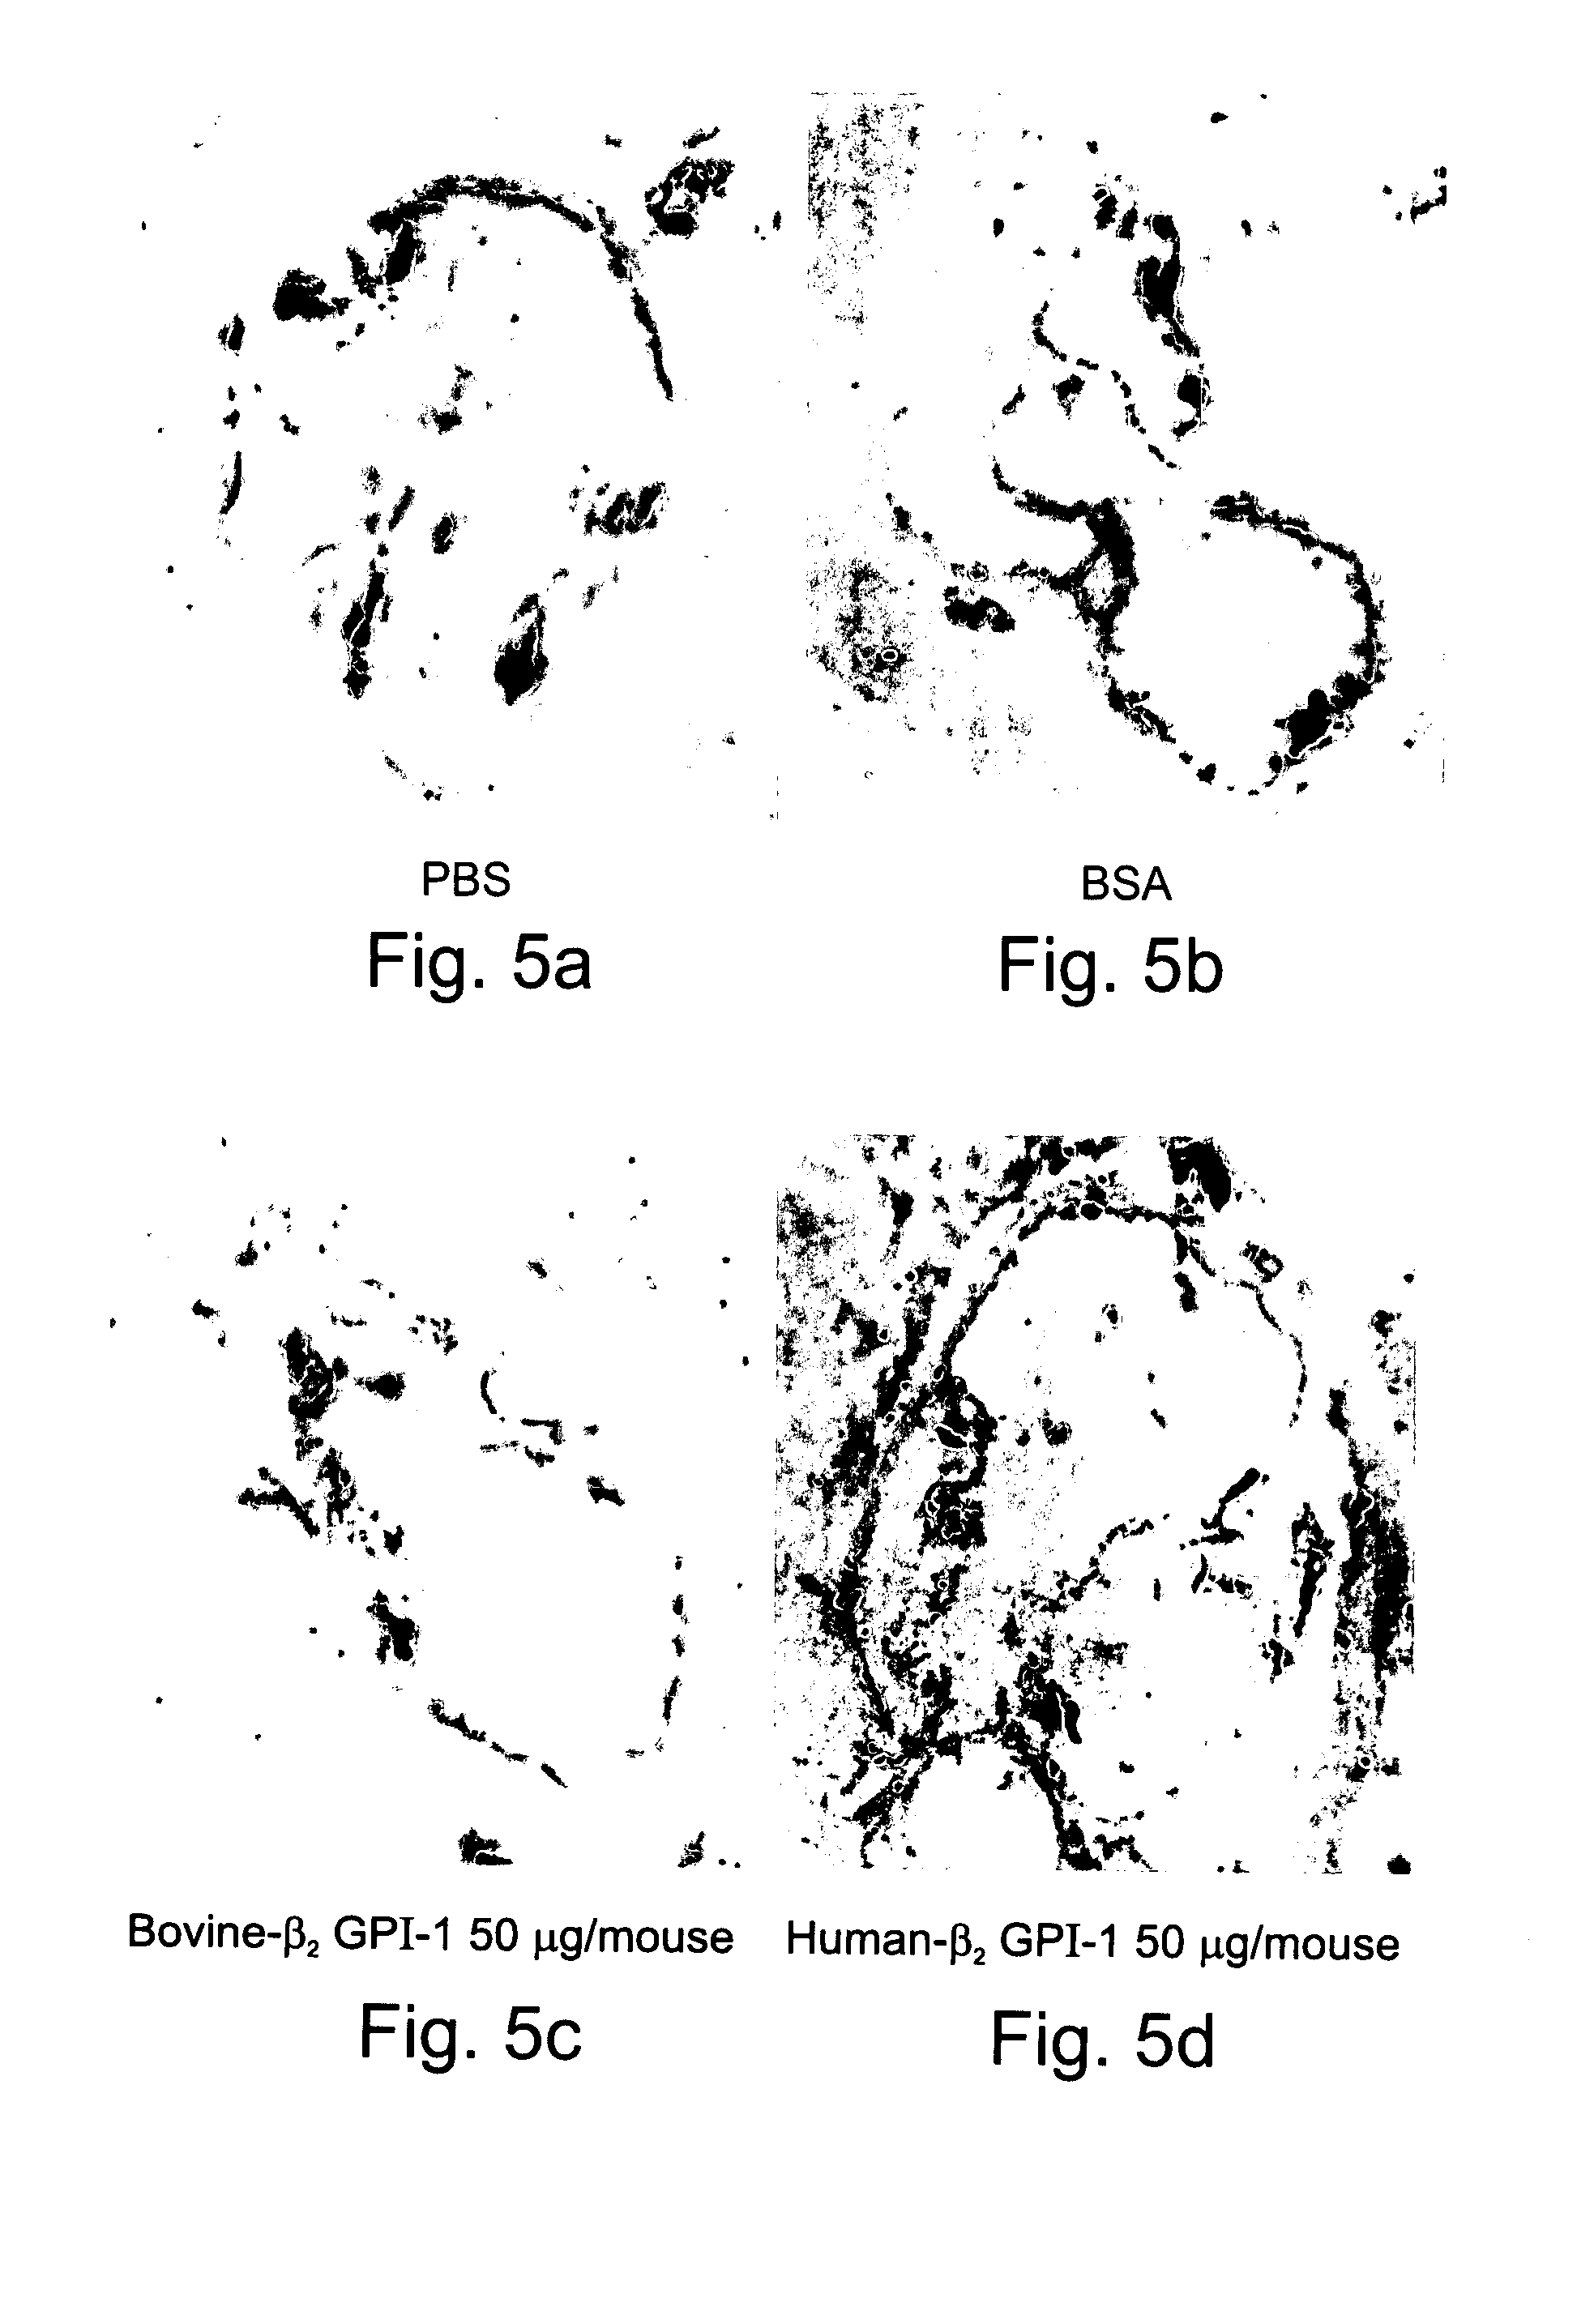 Compositions Containing Beta 2-Glycoprotein I-Derived Peptides for the Prevention and/or Treatment of Vascular Disease